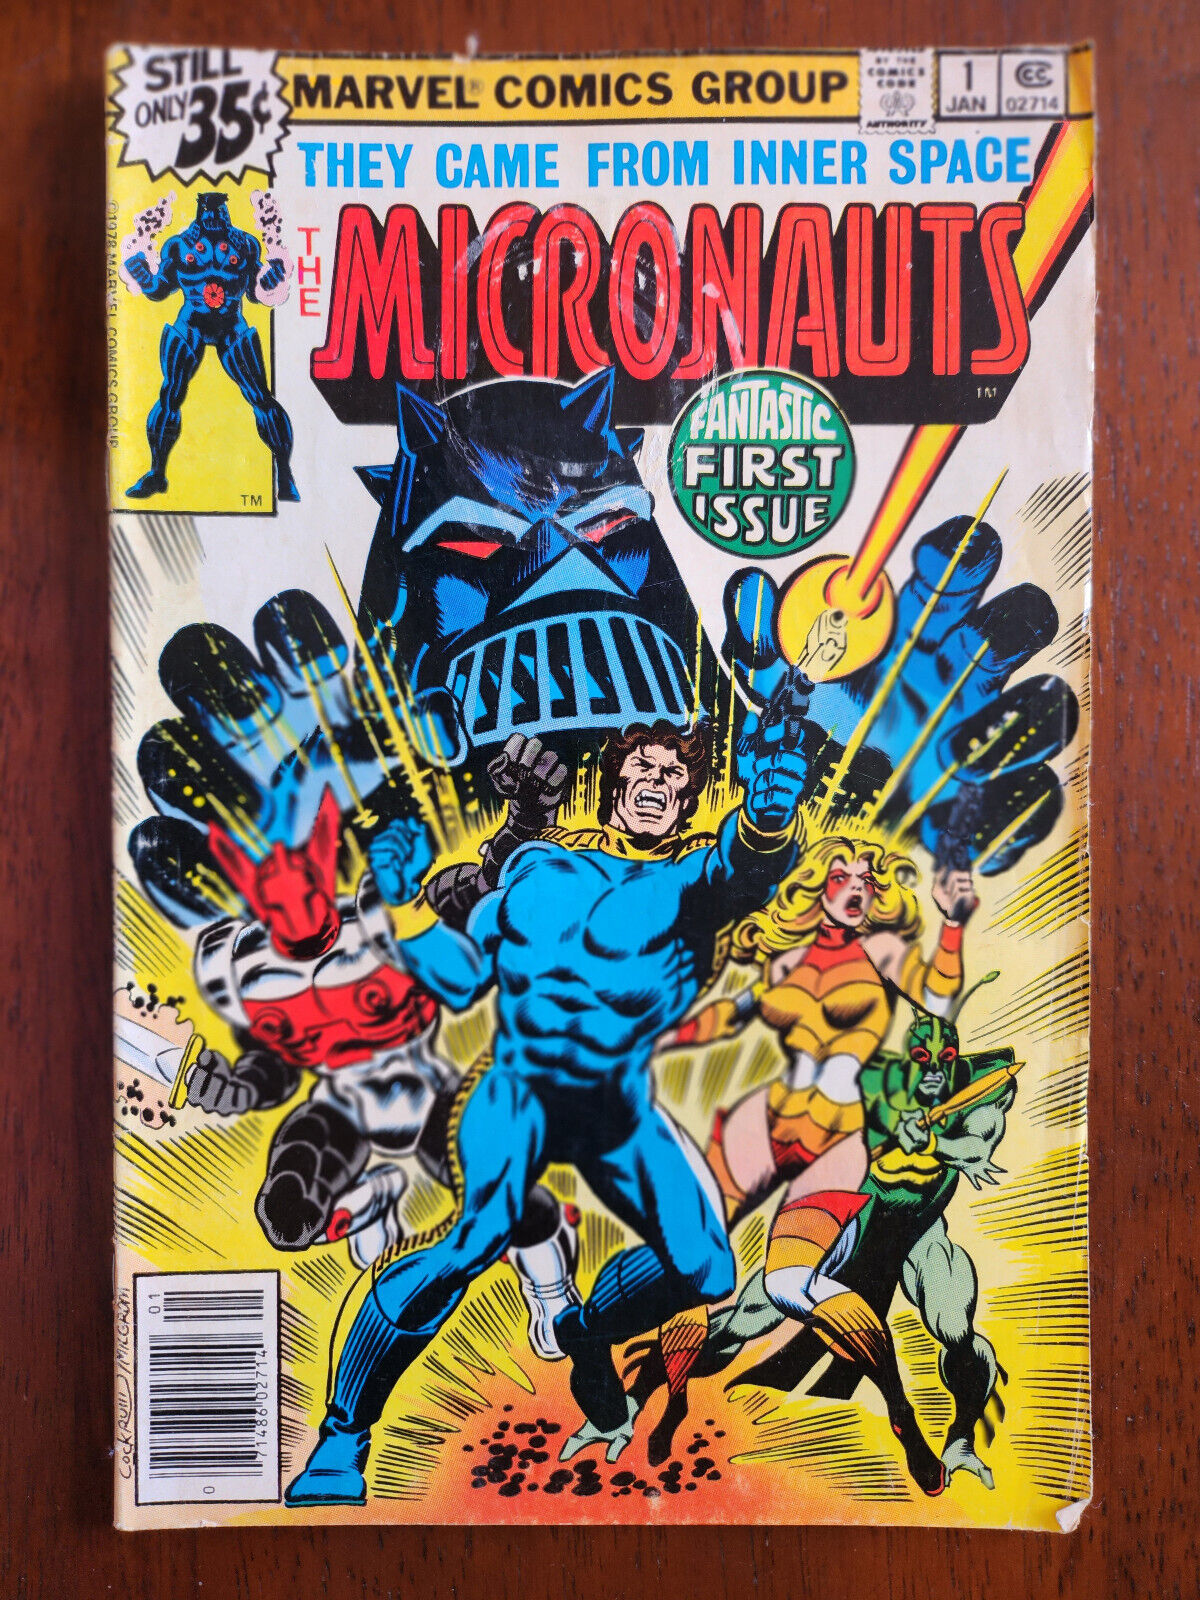 Micronauts #1-59 (1979-1984 1st Marvel Series) Choose Your Issue